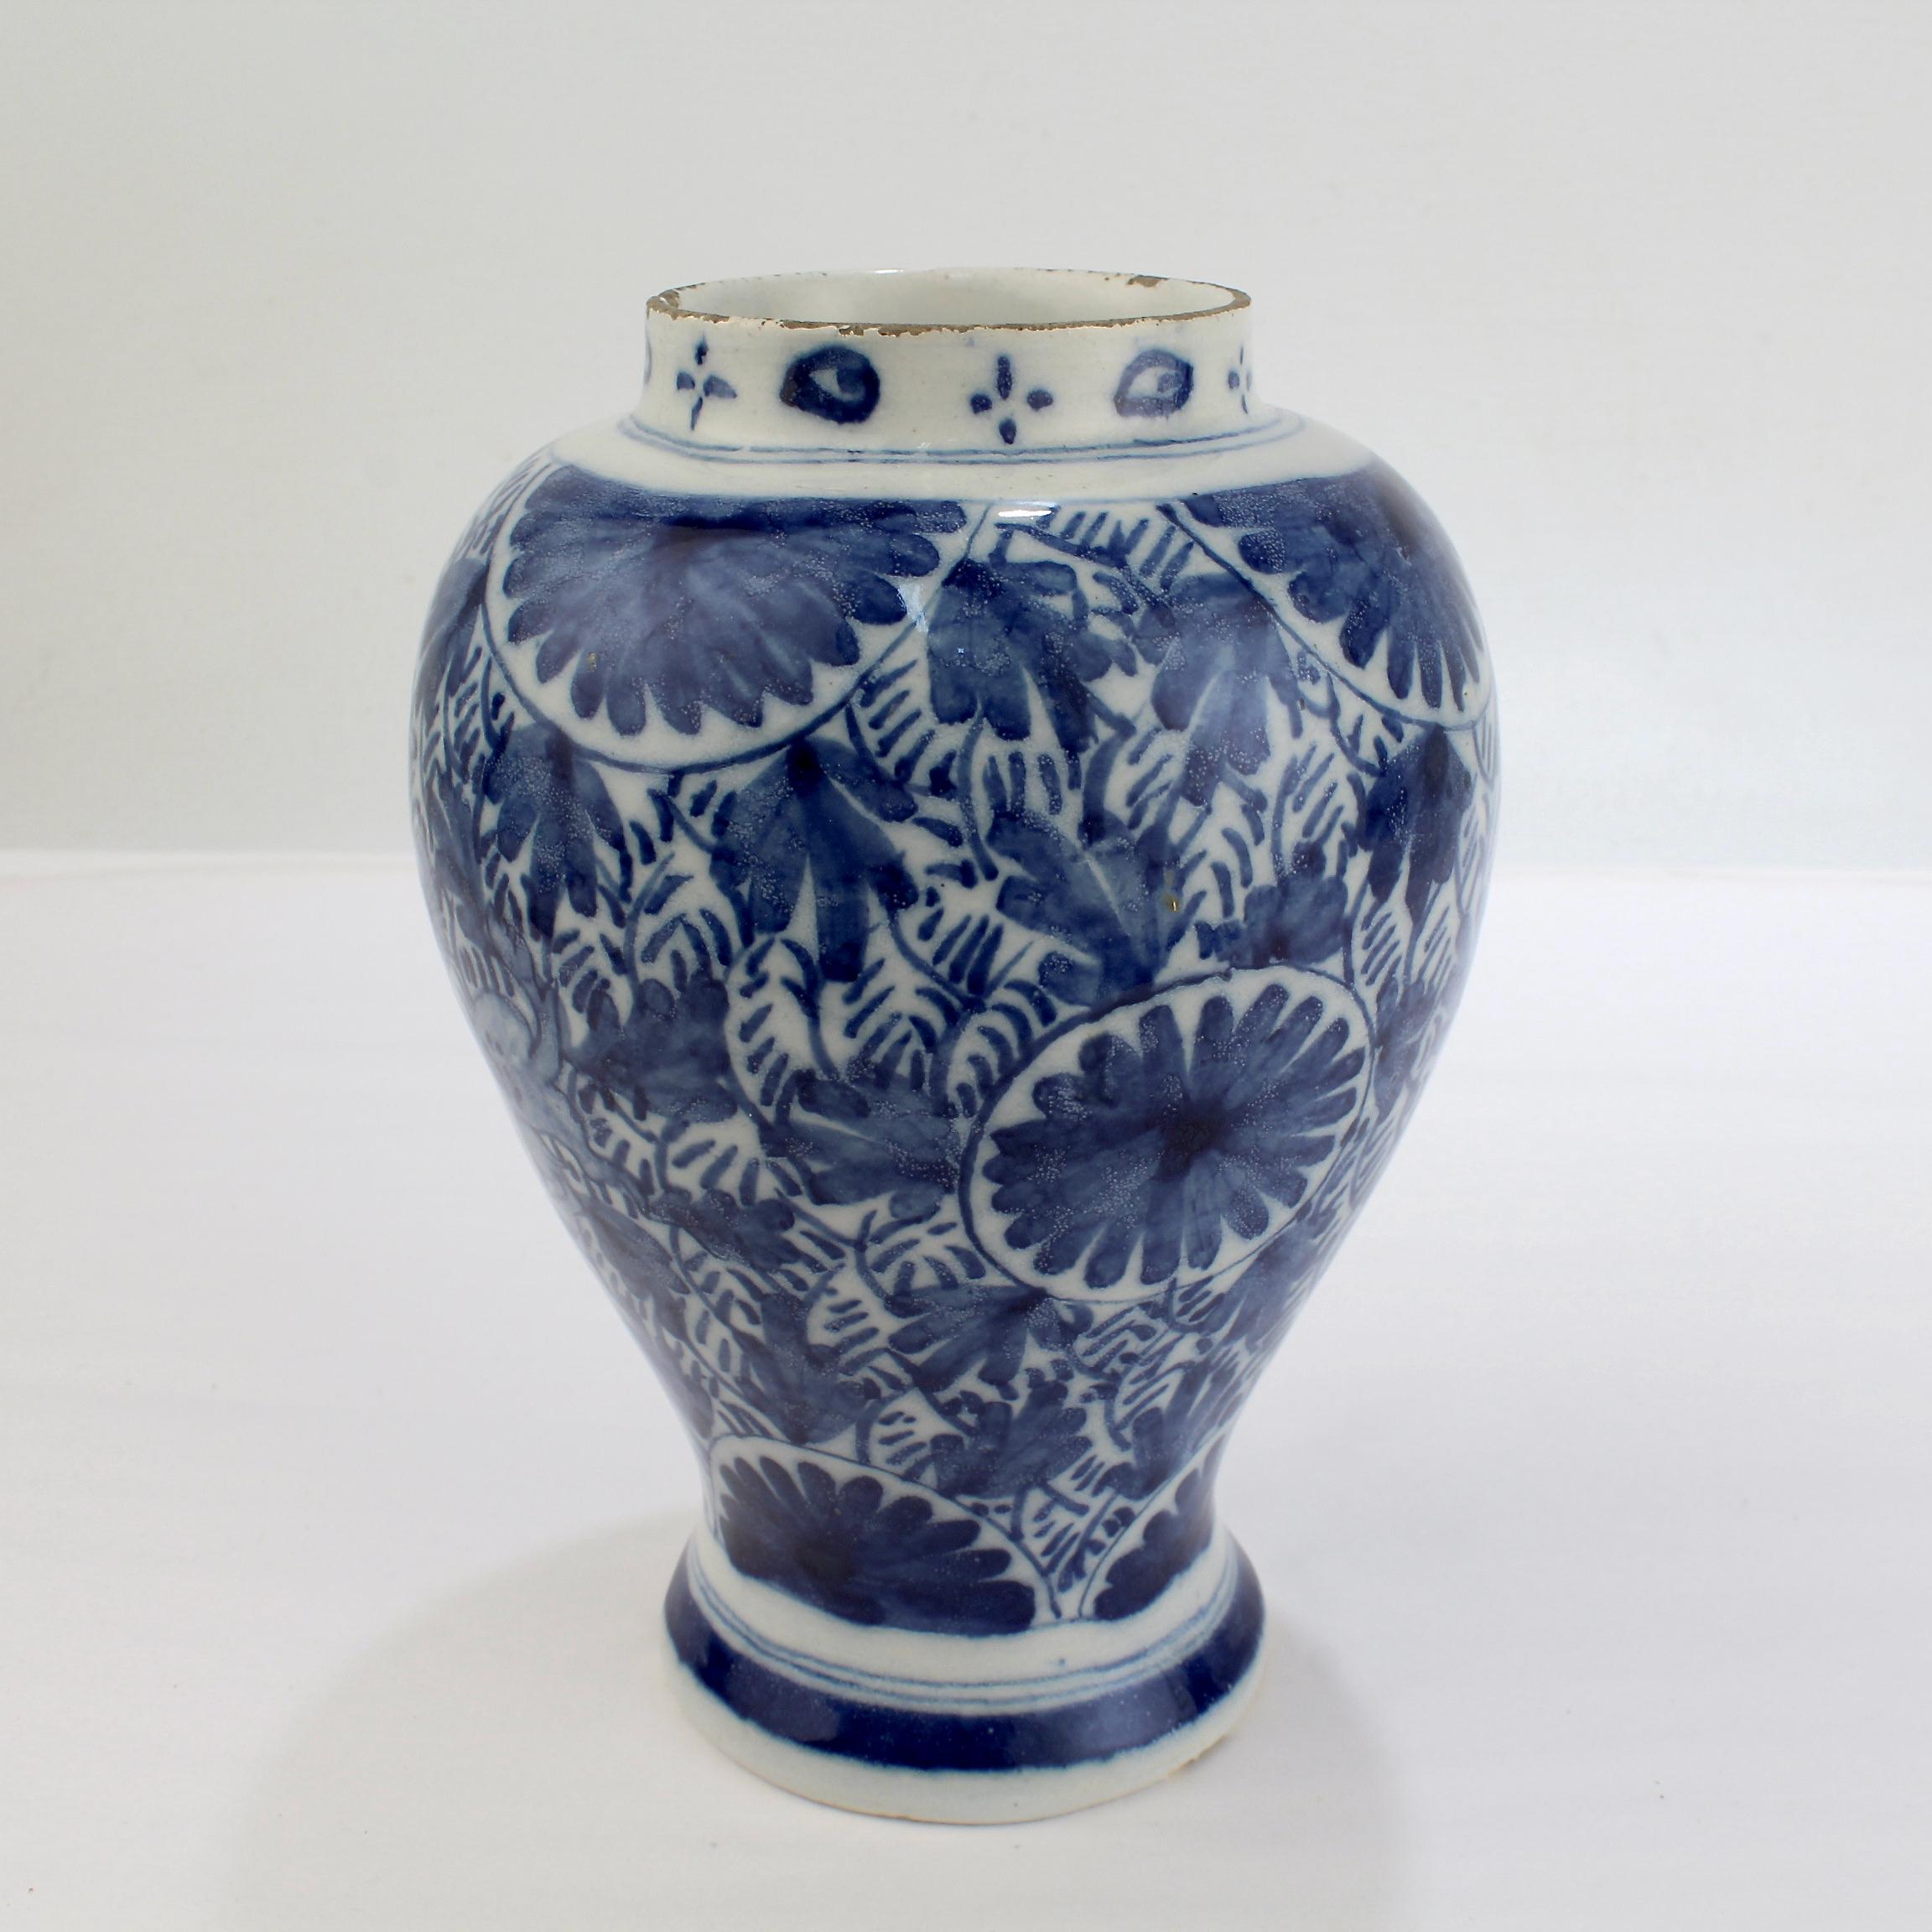 18th Century and Earlier Antique 18th Century Dutch Delft Pottery Jar or Vessel